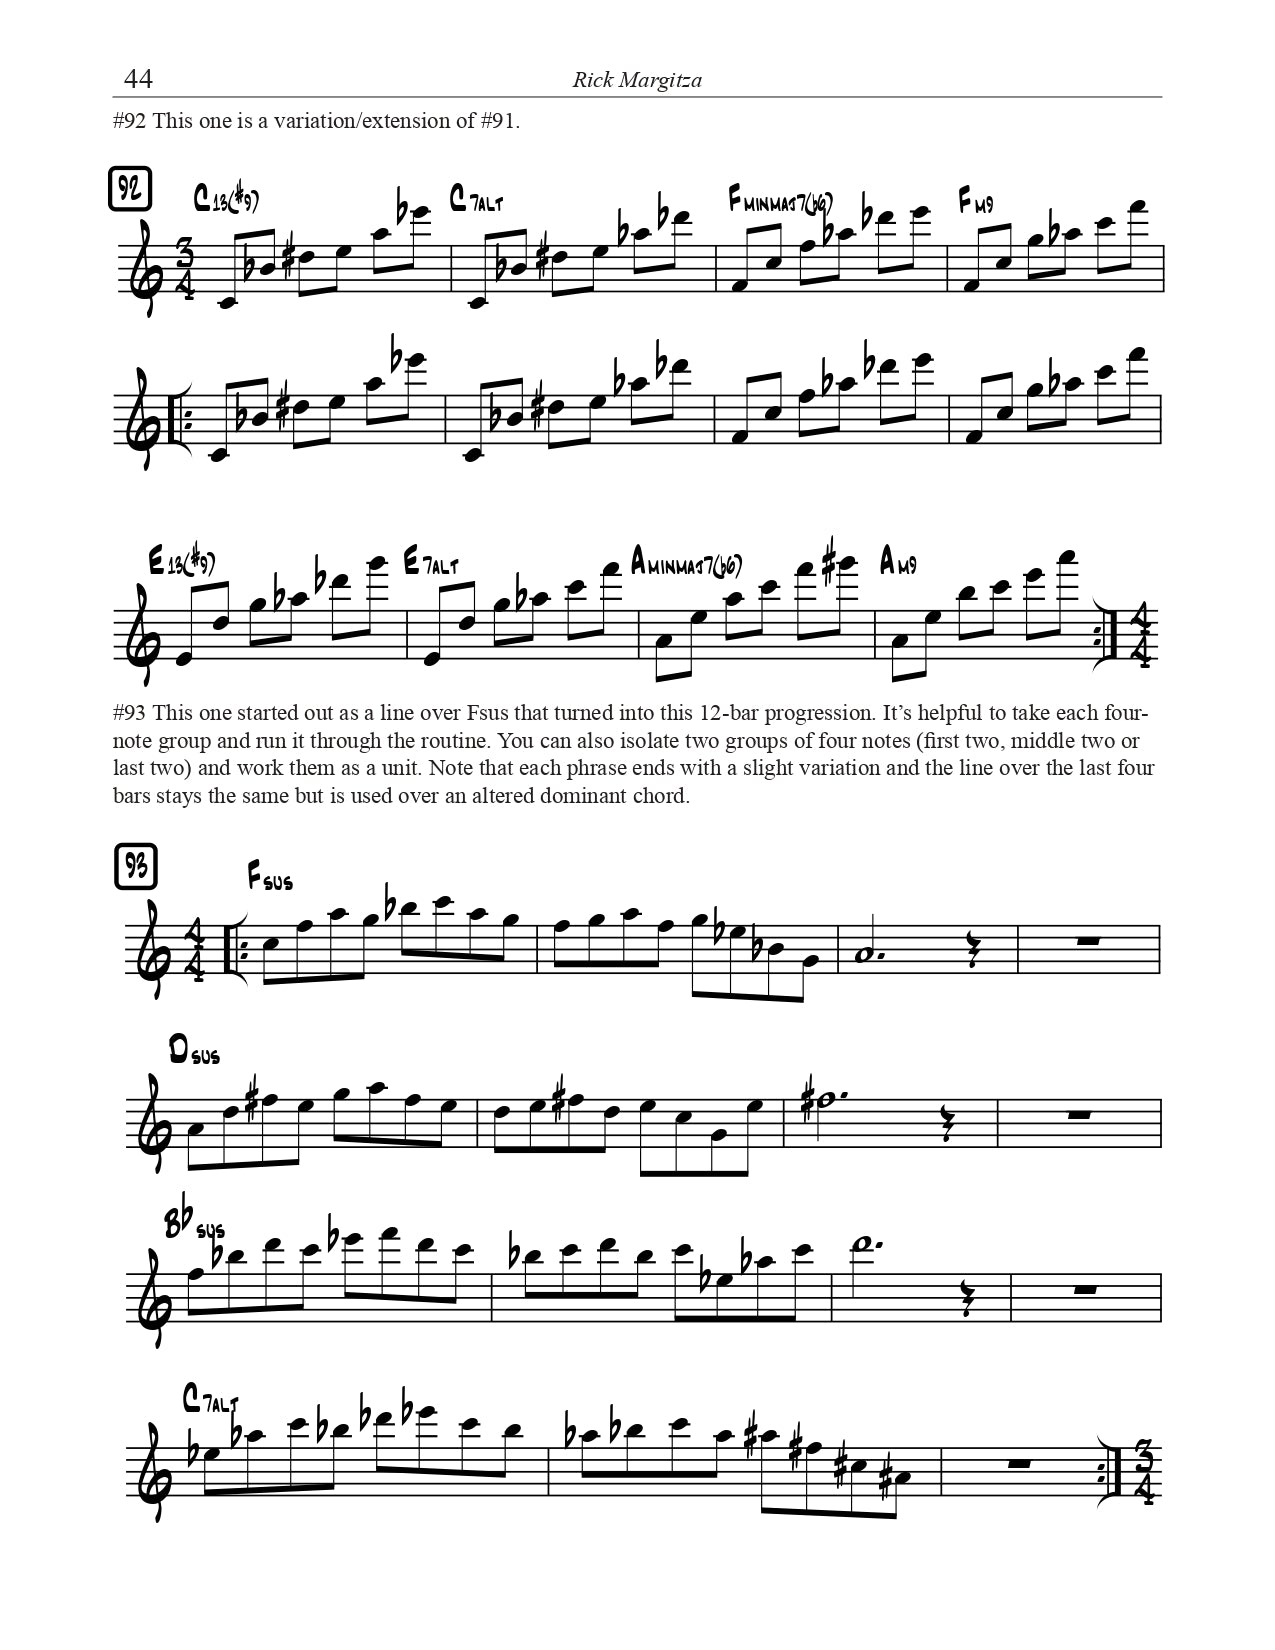 365 Days of Practice - A High Level Guide to Practicing From A Jazz Master Book